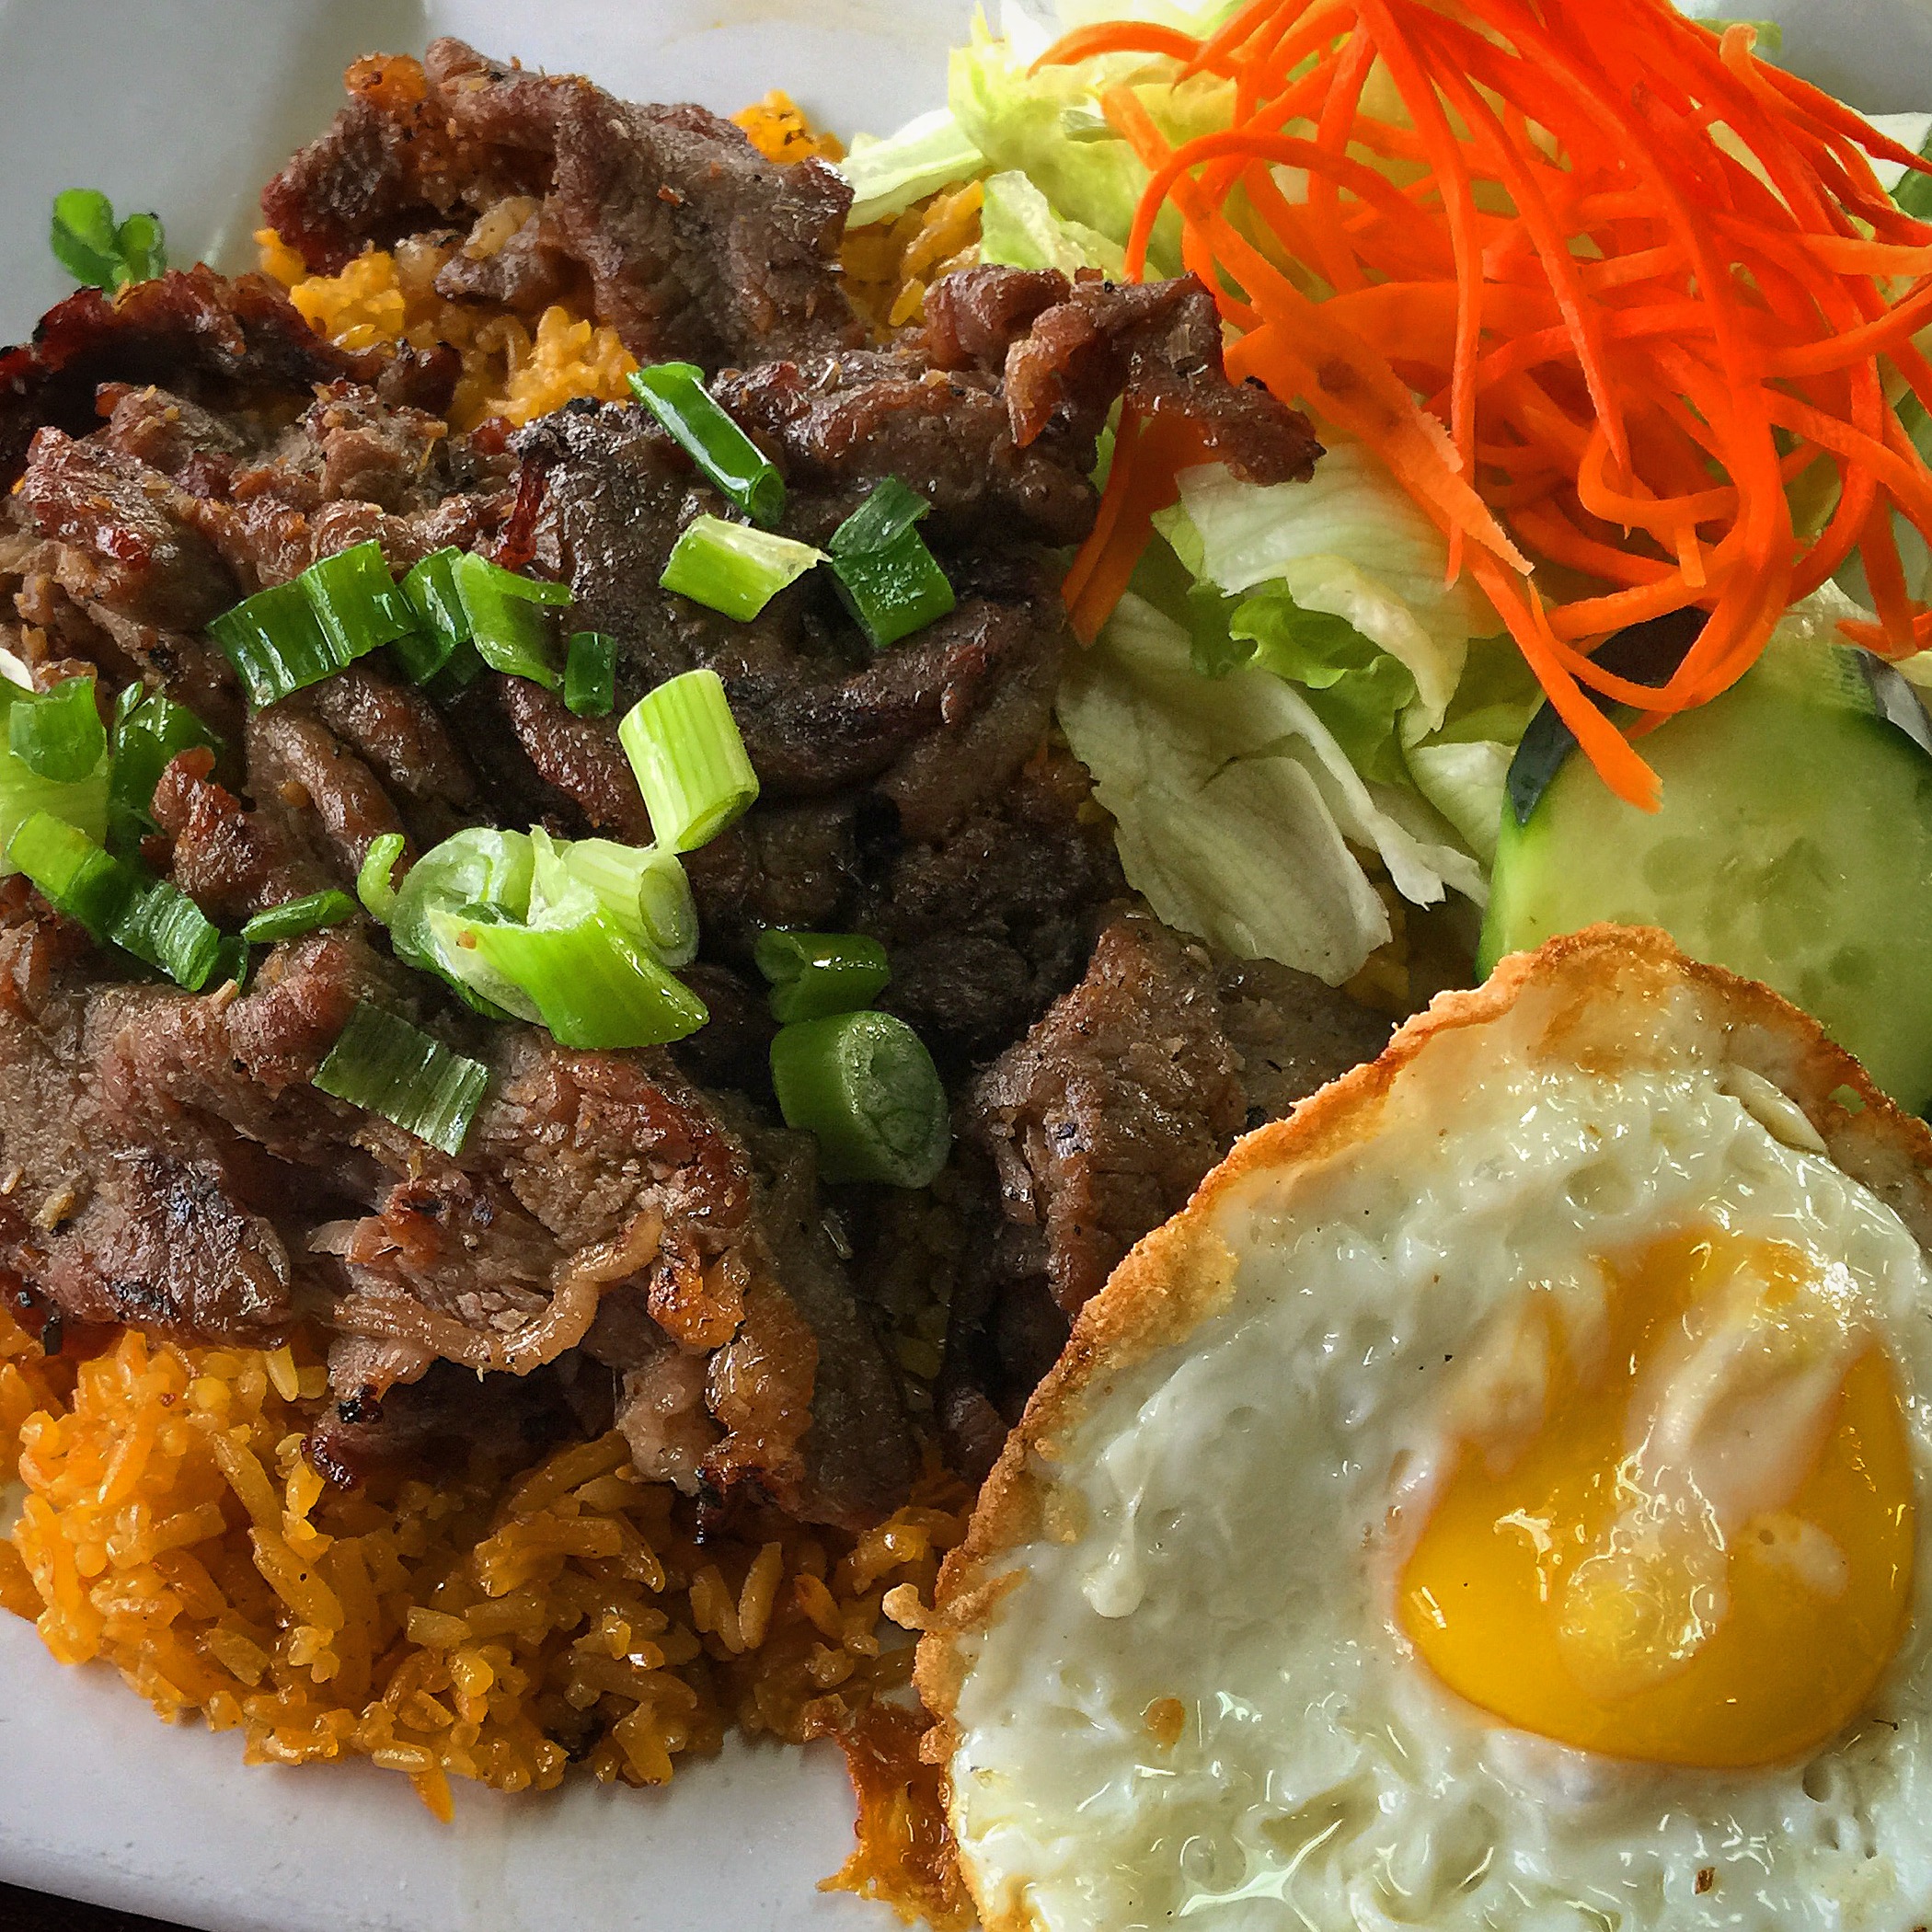 #45 - Special Yellow Rice, with Beef, plus a fried egg for an extra $1.35